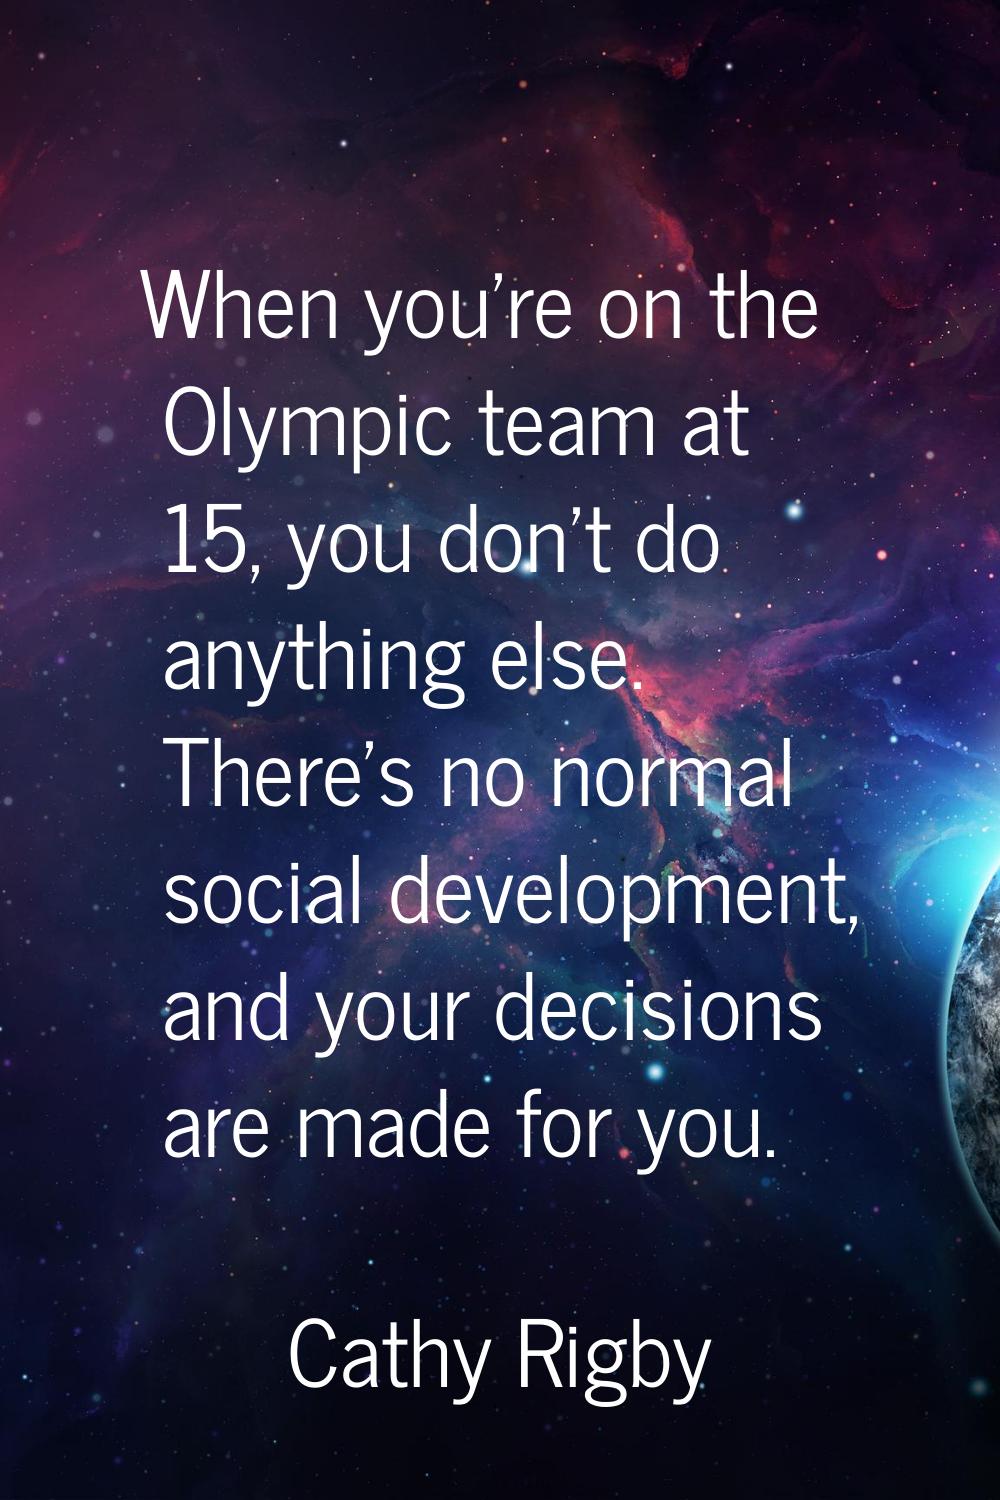 When you're on the Olympic team at 15, you don't do anything else. There's no normal social develop